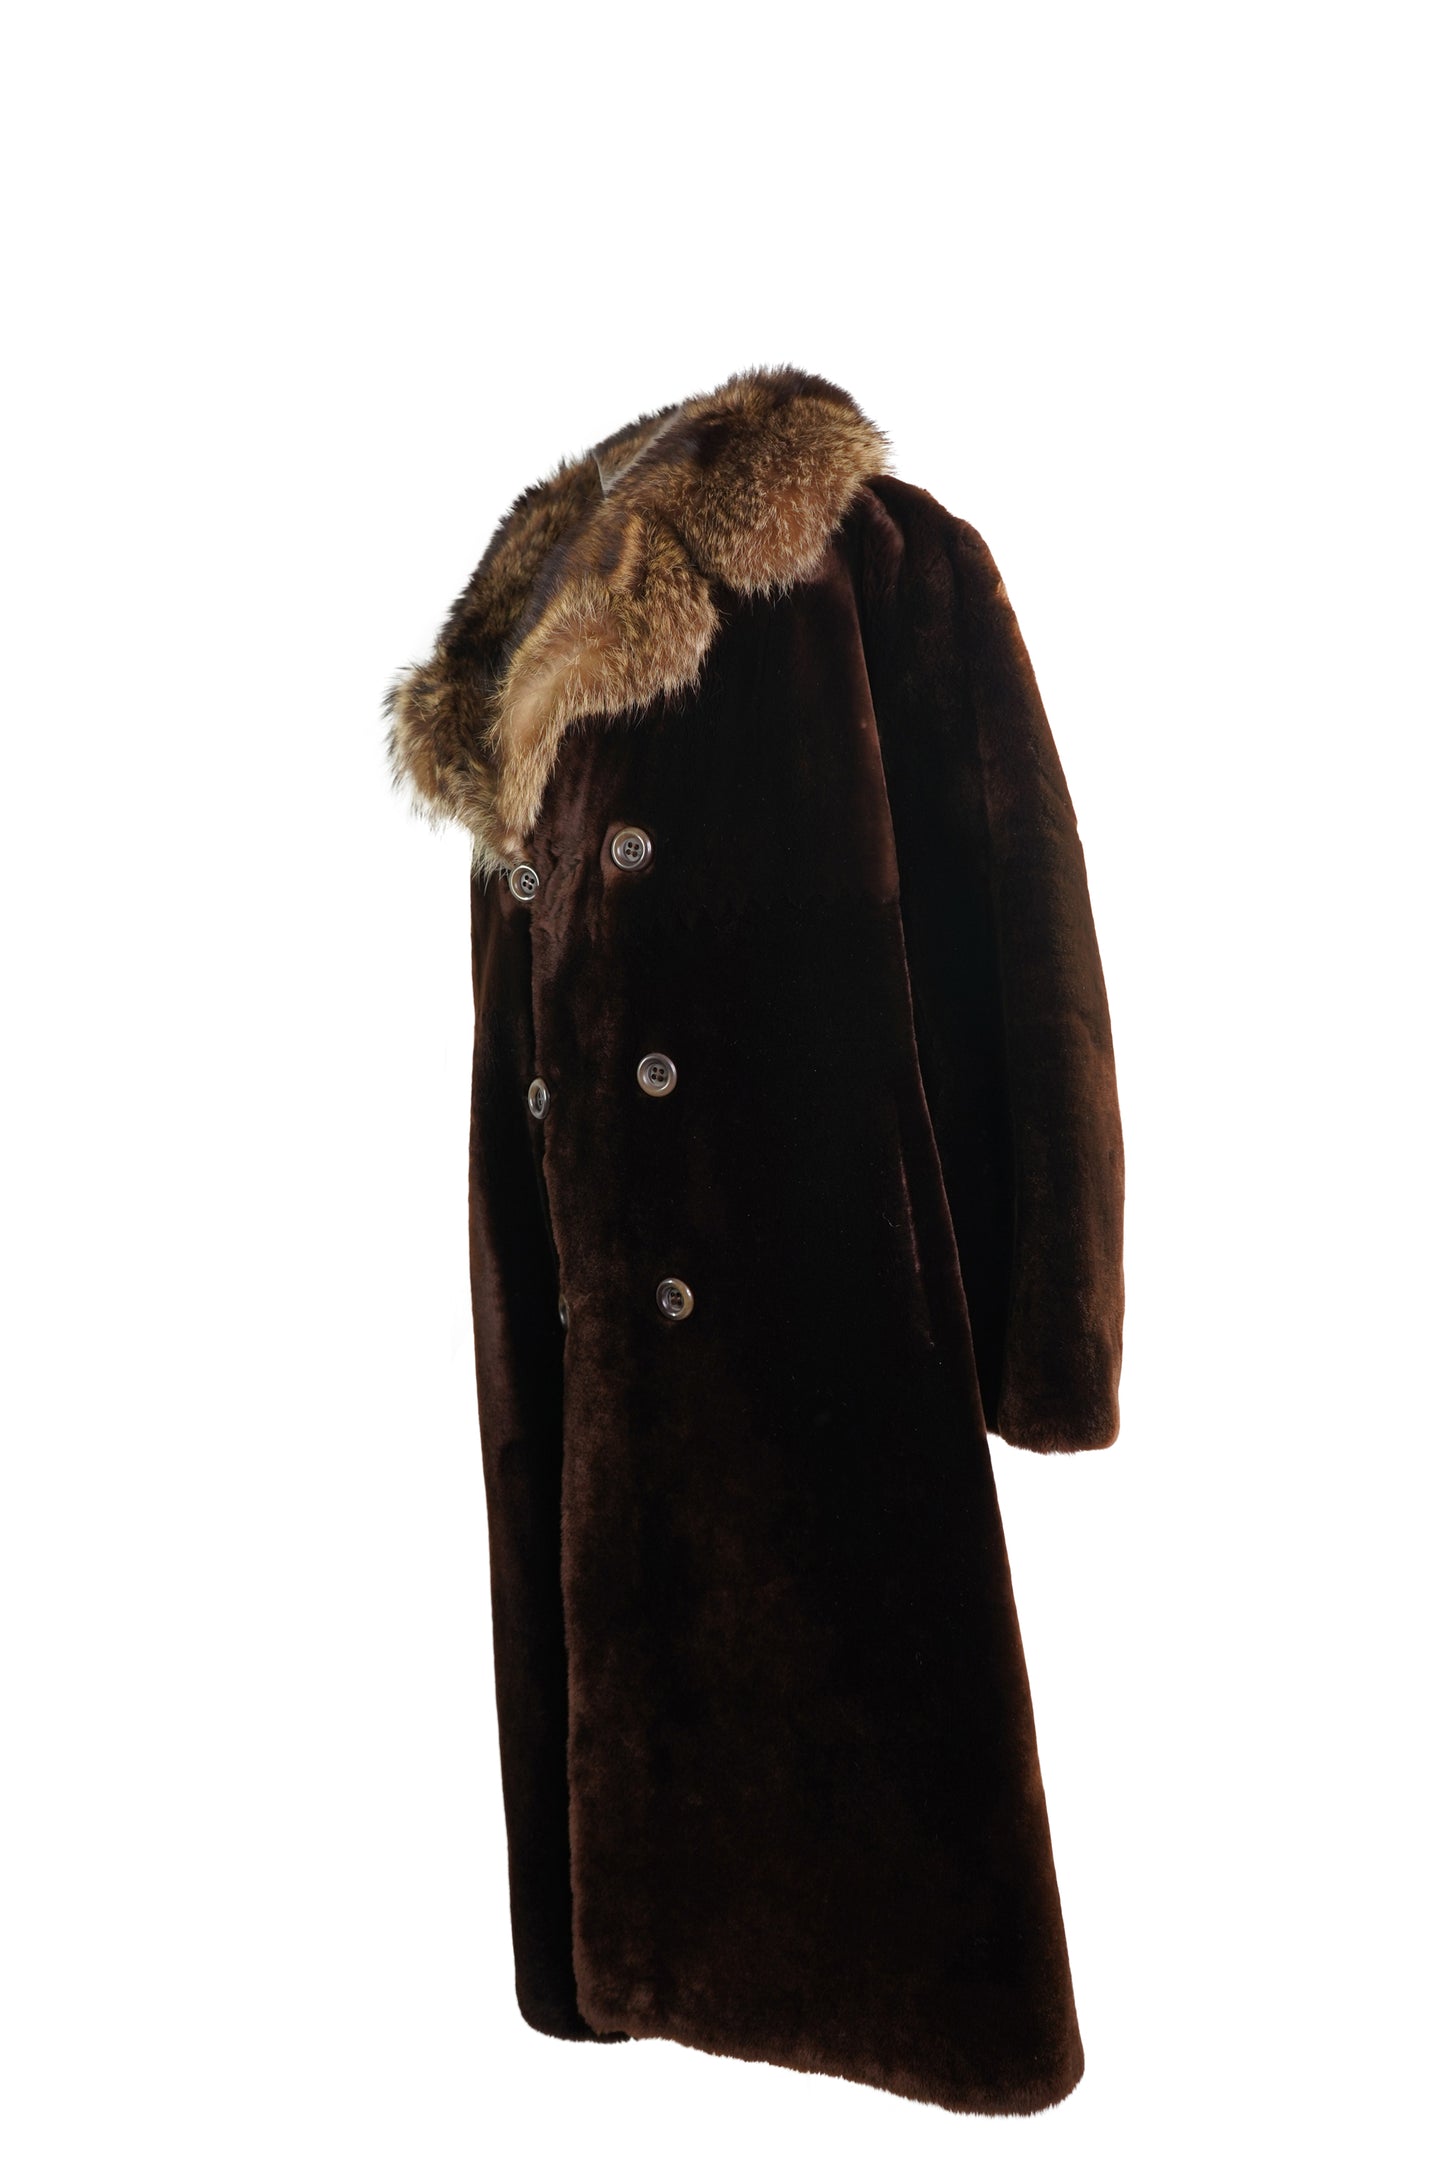 1950's Vintage Shearling Jacket with Raccoon Trim